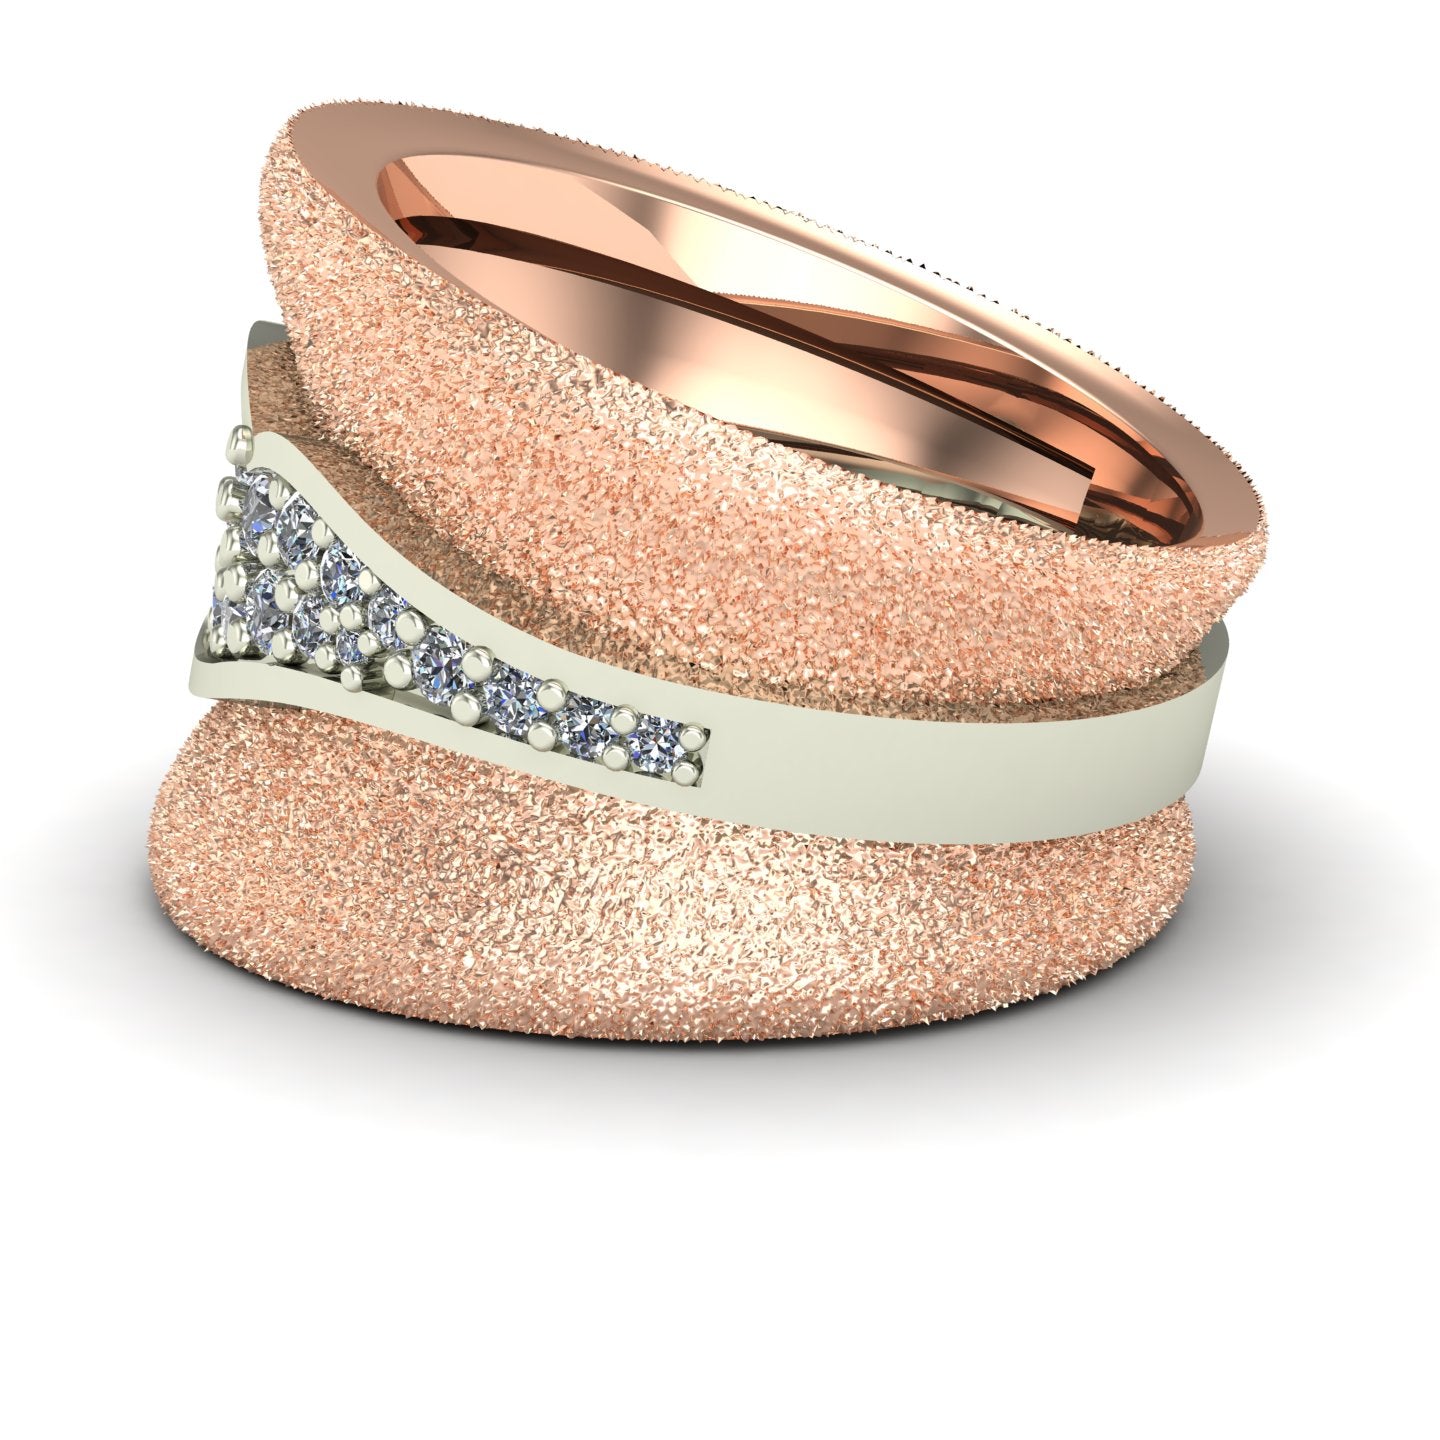 diamond pave cigar band two tone ring in 14k rose and white gold - Charles Babb Designs - side view